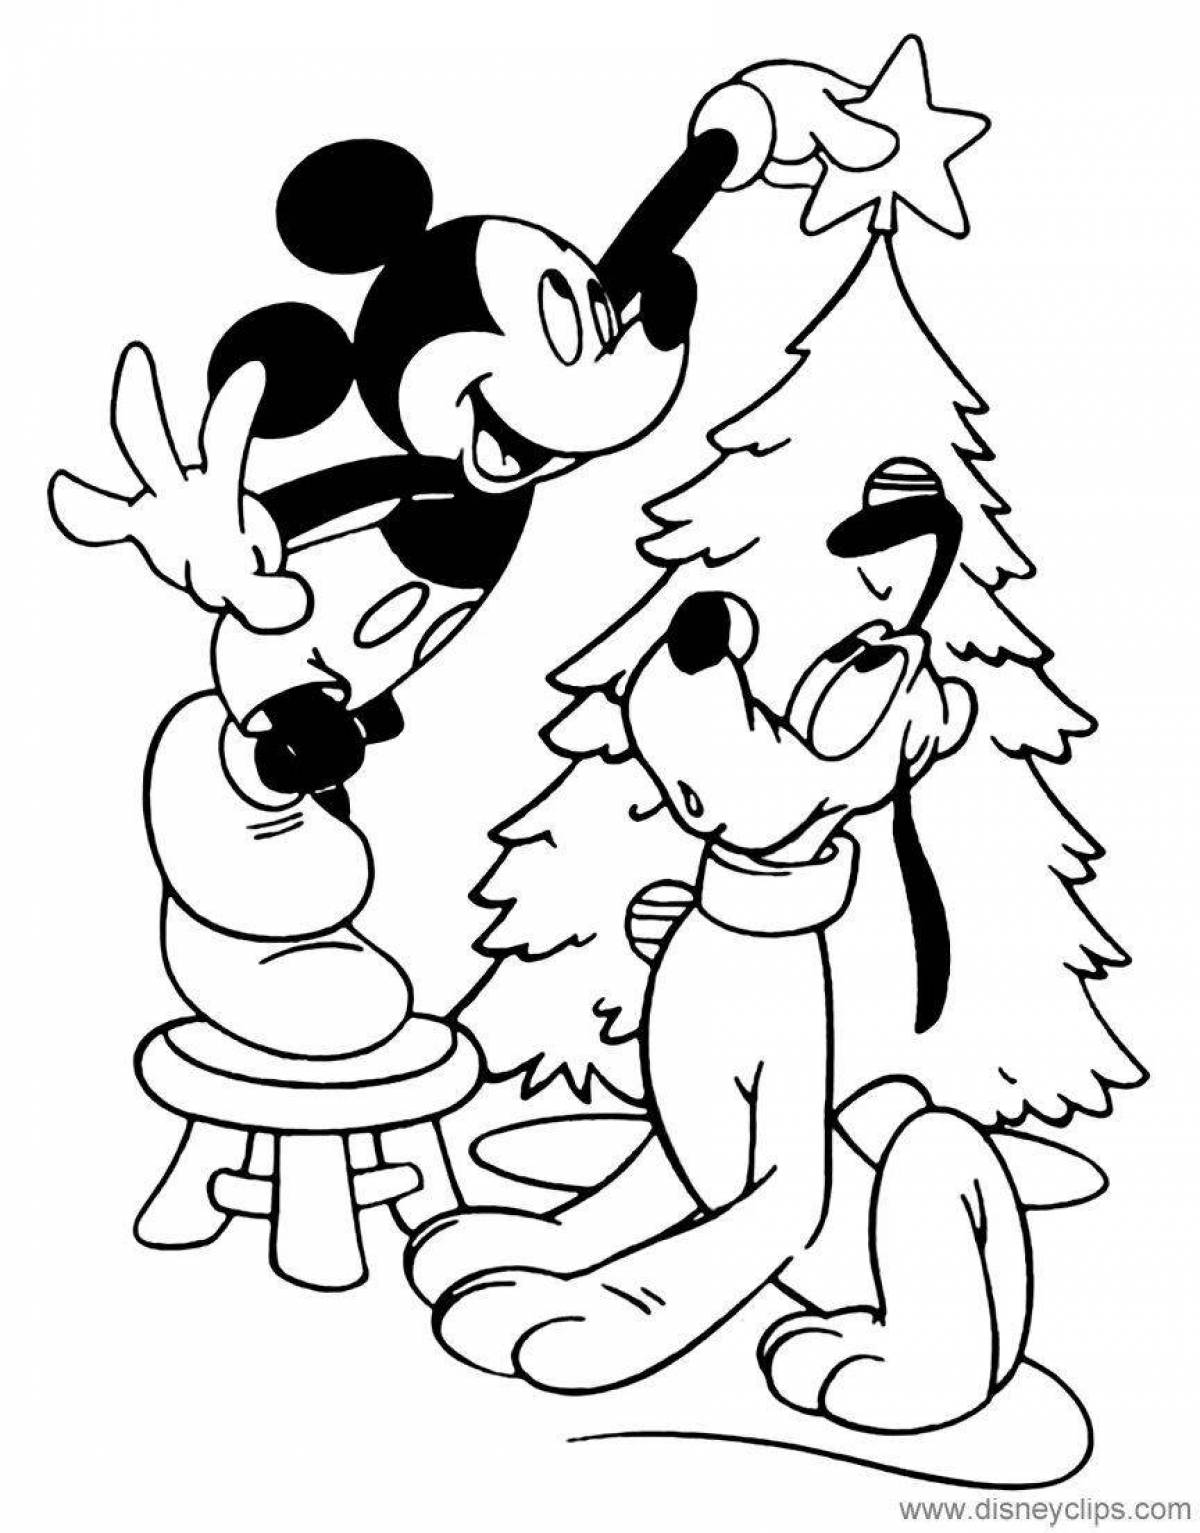 Mickey Mouse Christmas coloring book